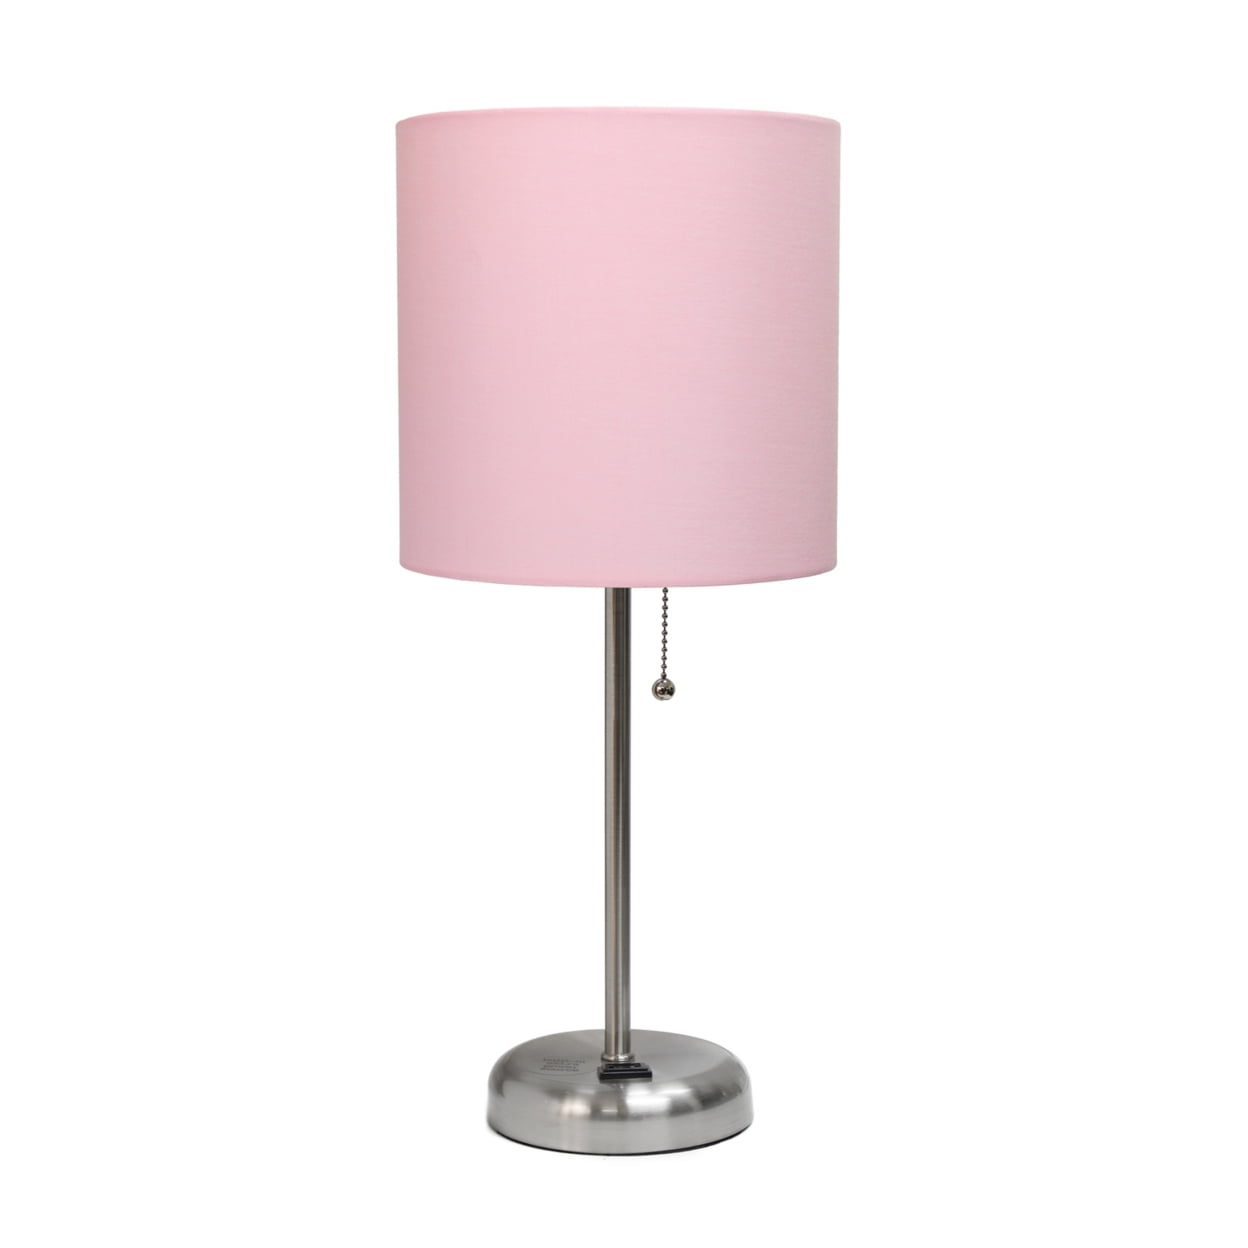 Lt2024-lpk 60w Stick Lamp With Charging Outlet & Fabric Shade - Light Pink